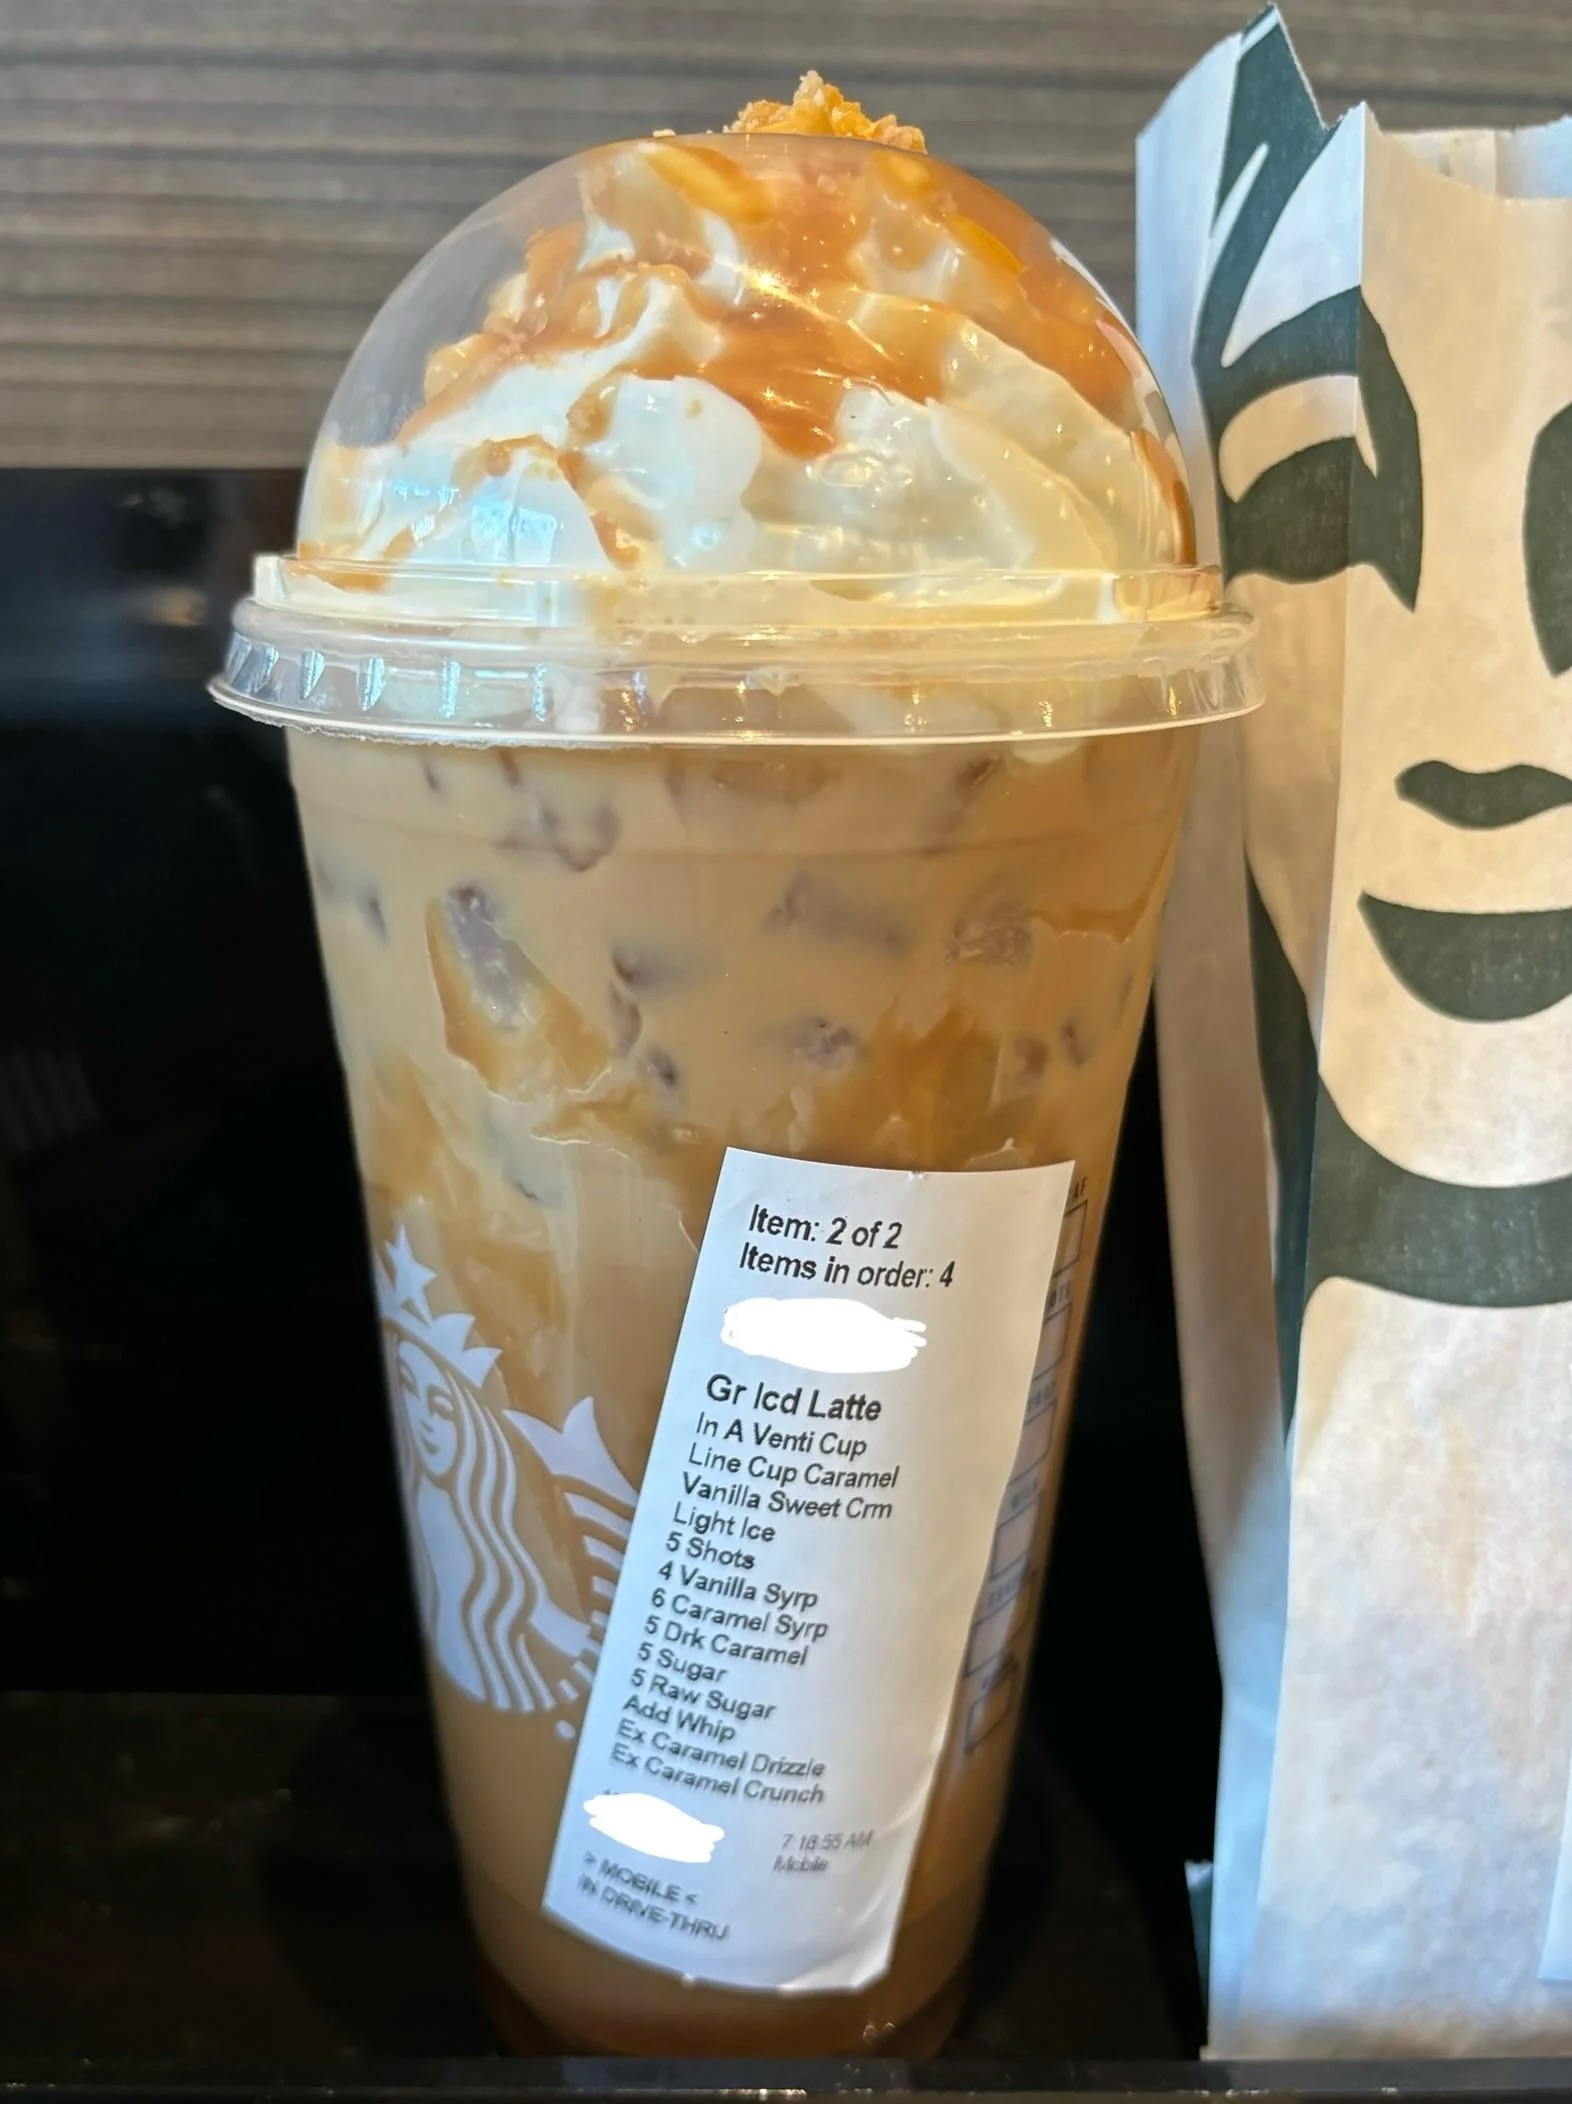 Iced latte with caramel drizzle in a clear cup, custom order sticker visible